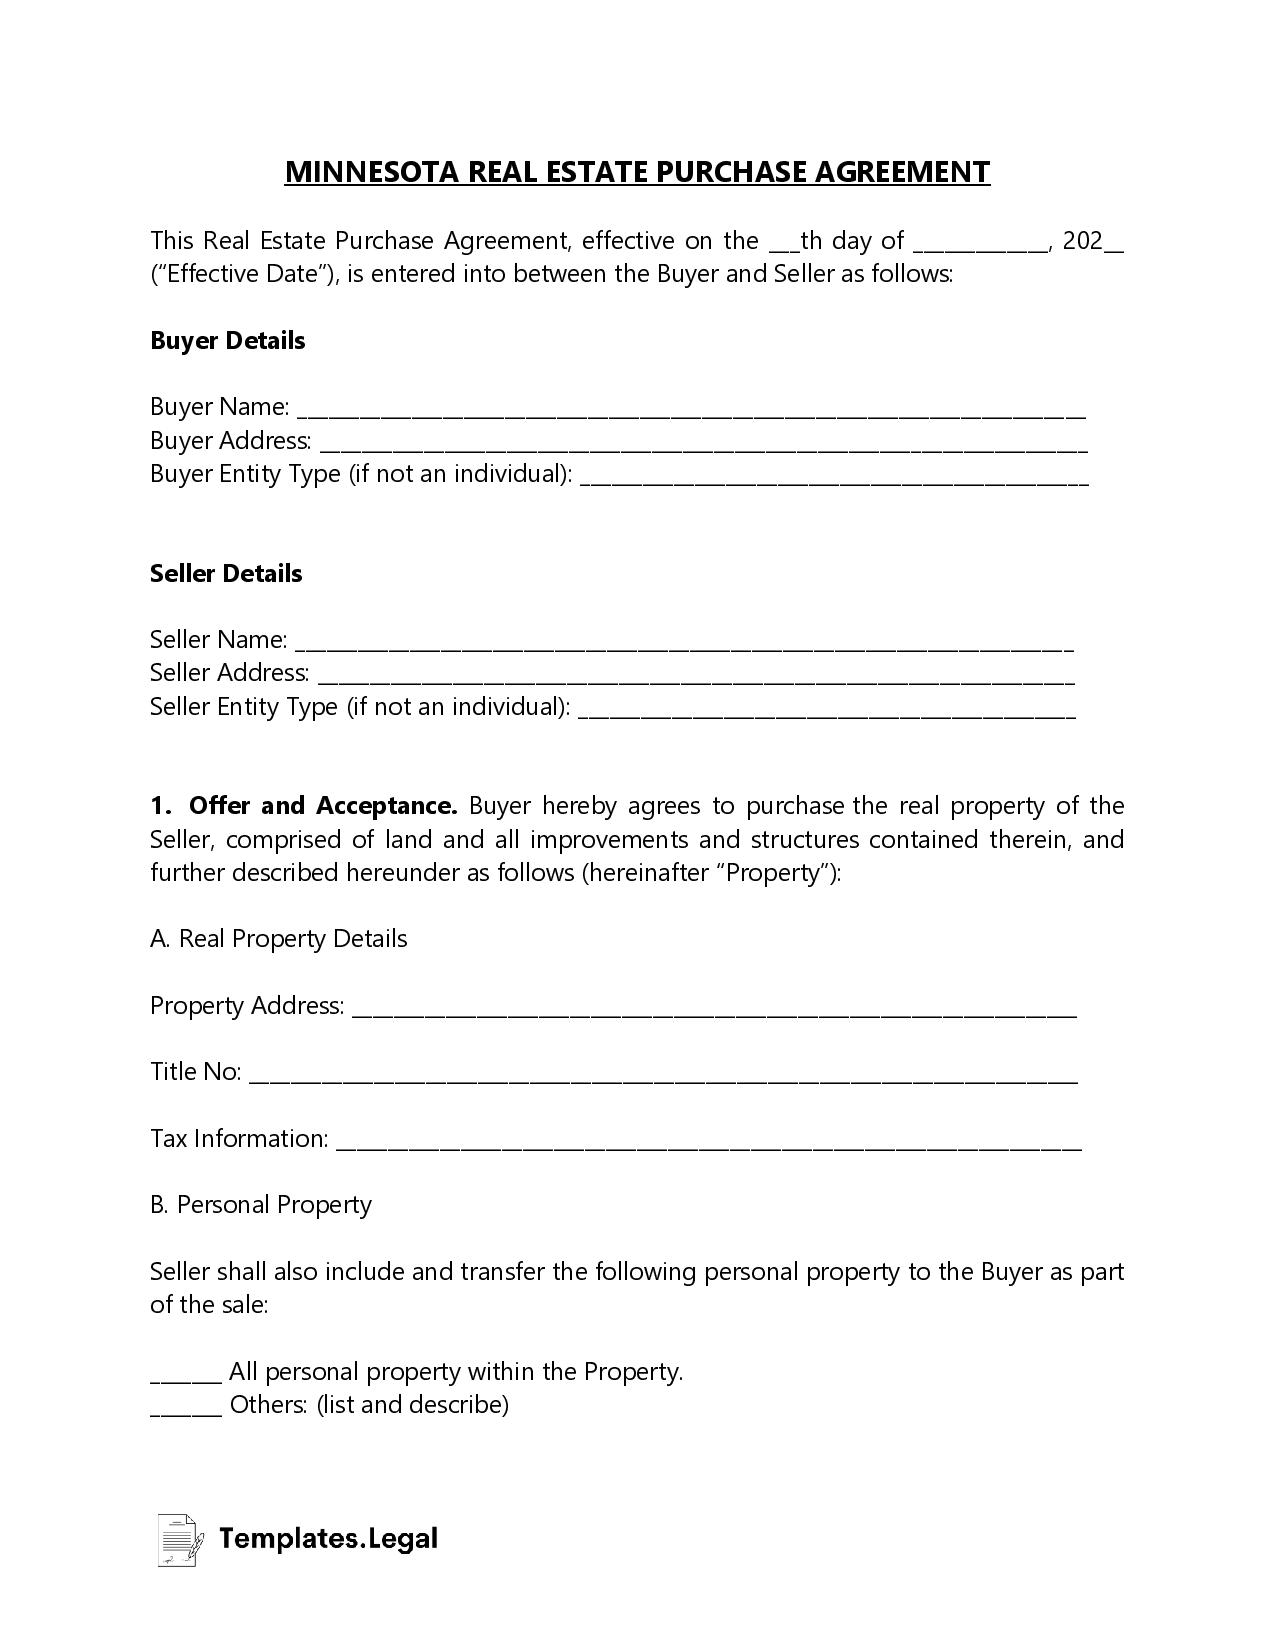 Minnesota Real Estate Purchase Agreement - Templates.Legal